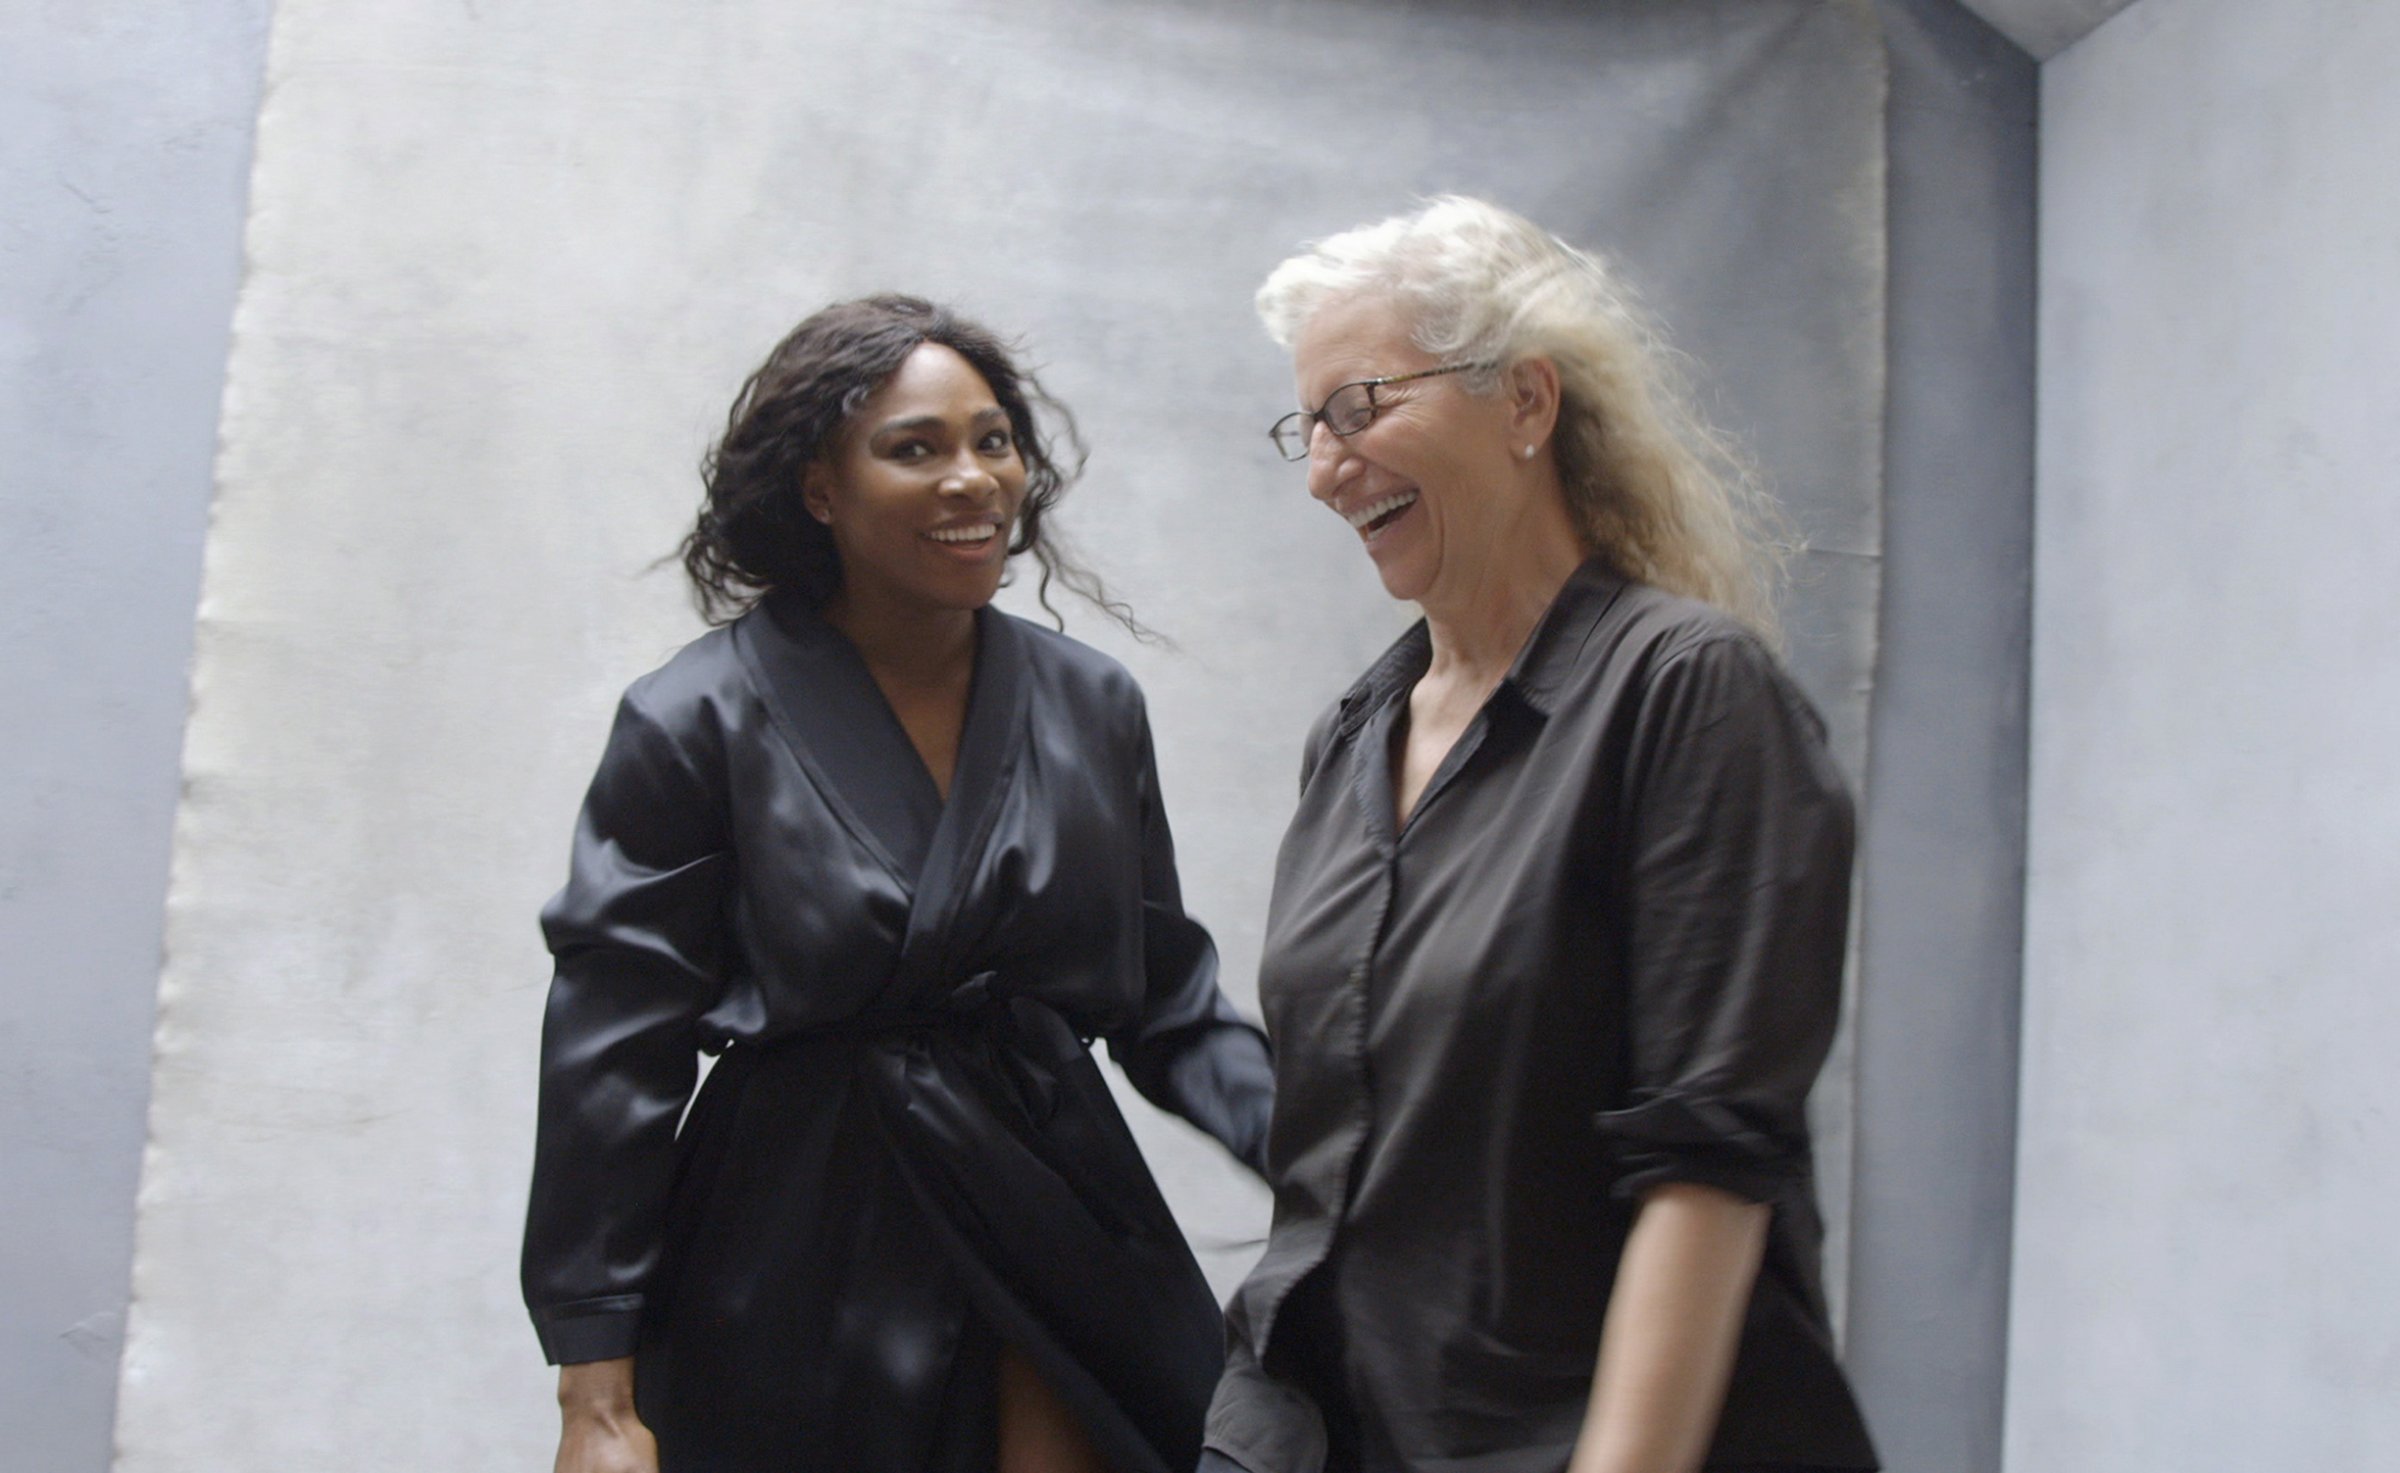 Serena Williams and Annie Leibovitz behind the scenes for the 2016 Pirelli Calendar shoot.